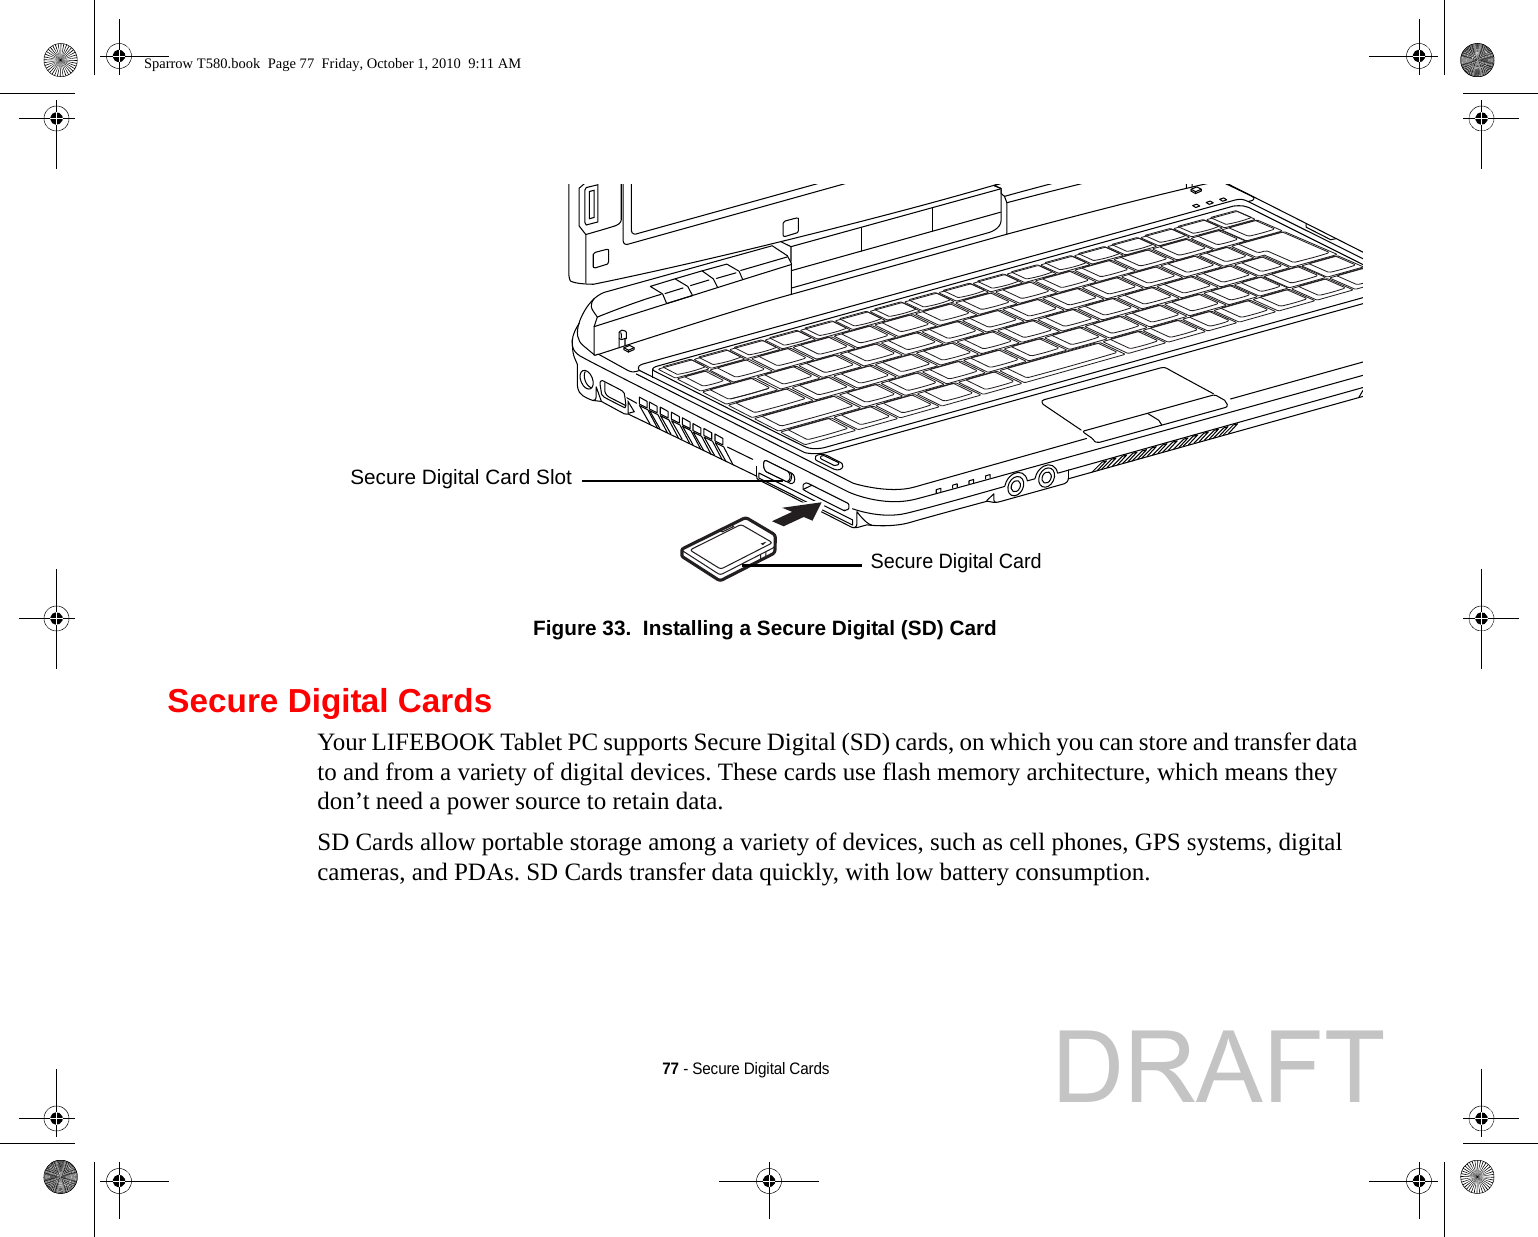 77 - Secure Digital CardsFigure 33.  Installing a Secure Digital (SD) CardSecure Digital CardsYour LIFEBOOK Tablet PC supports Secure Digital (SD) cards, on which you can store and transfer data to and from a variety of digital devices. These cards use flash memory architecture, which means they don’t need a power source to retain data. SD Cards allow portable storage among a variety of devices, such as cell phones, GPS systems, digital cameras, and PDAs. SD Cards transfer data quickly, with low battery consumption. Secure Digital CardSecure Digital Card SlotSparrow T580.book  Page 77  Friday, October 1, 2010  9:11 AMDRAFT